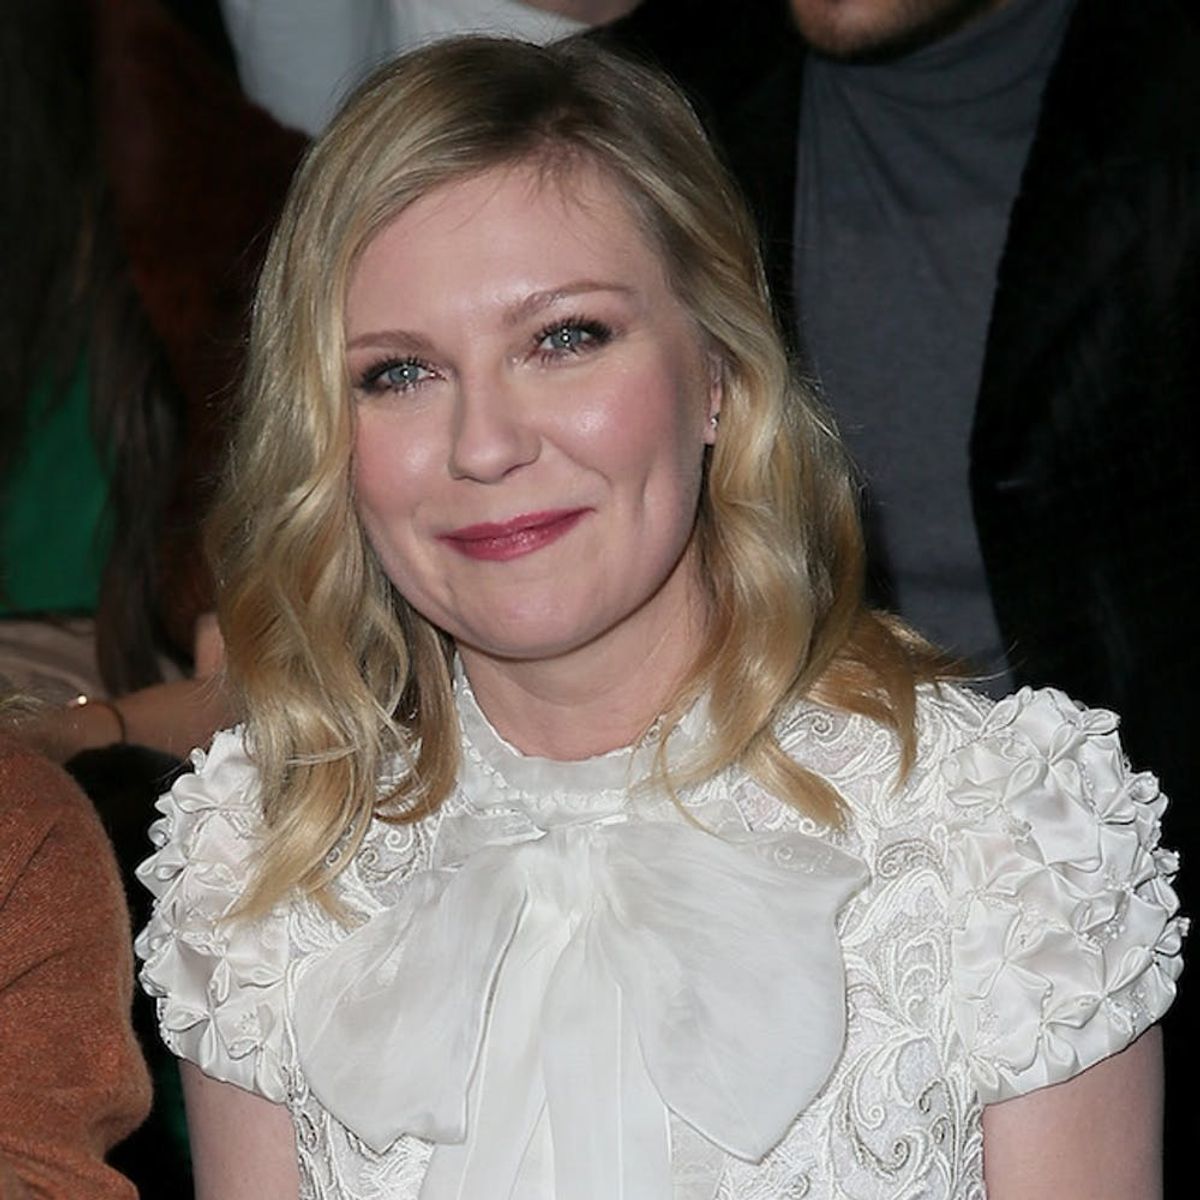 Kirsten Dunst’s Engagement Ring Is So Extravagant That Even Diamond Experts Are Impressed